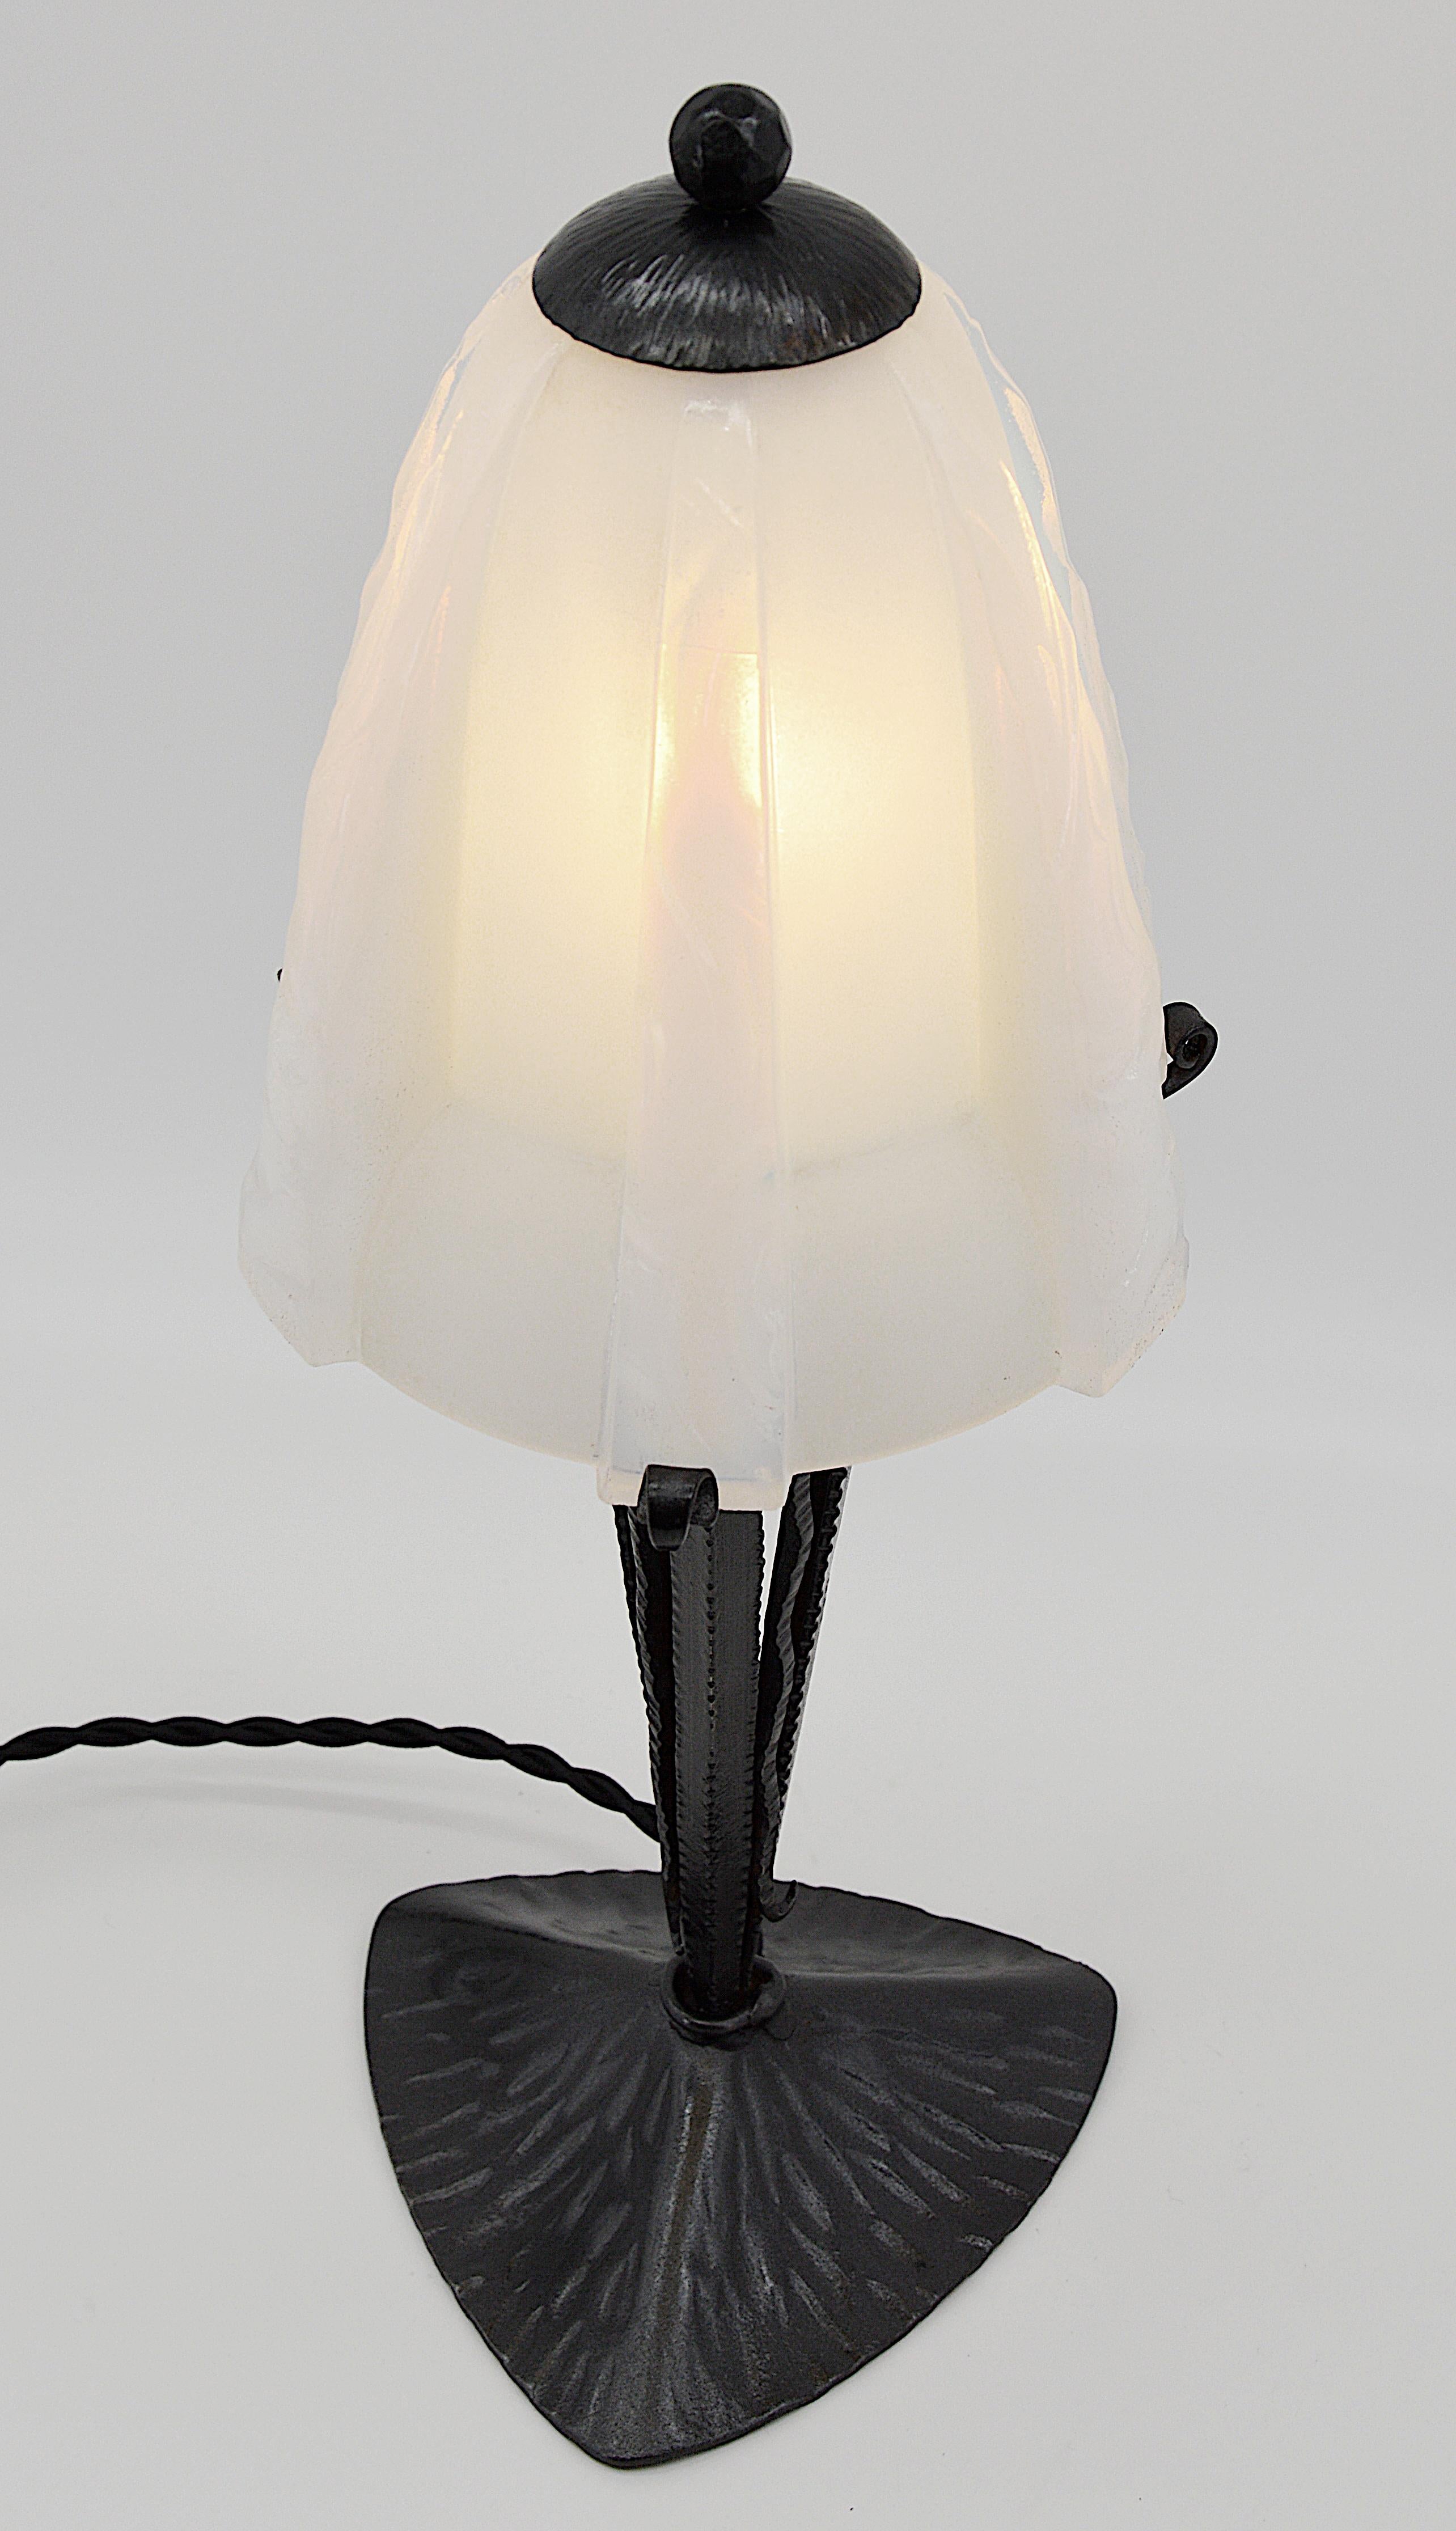 Jean Gauthier French Art Deco Opalescent Table Lamp, 1930s For Sale 1